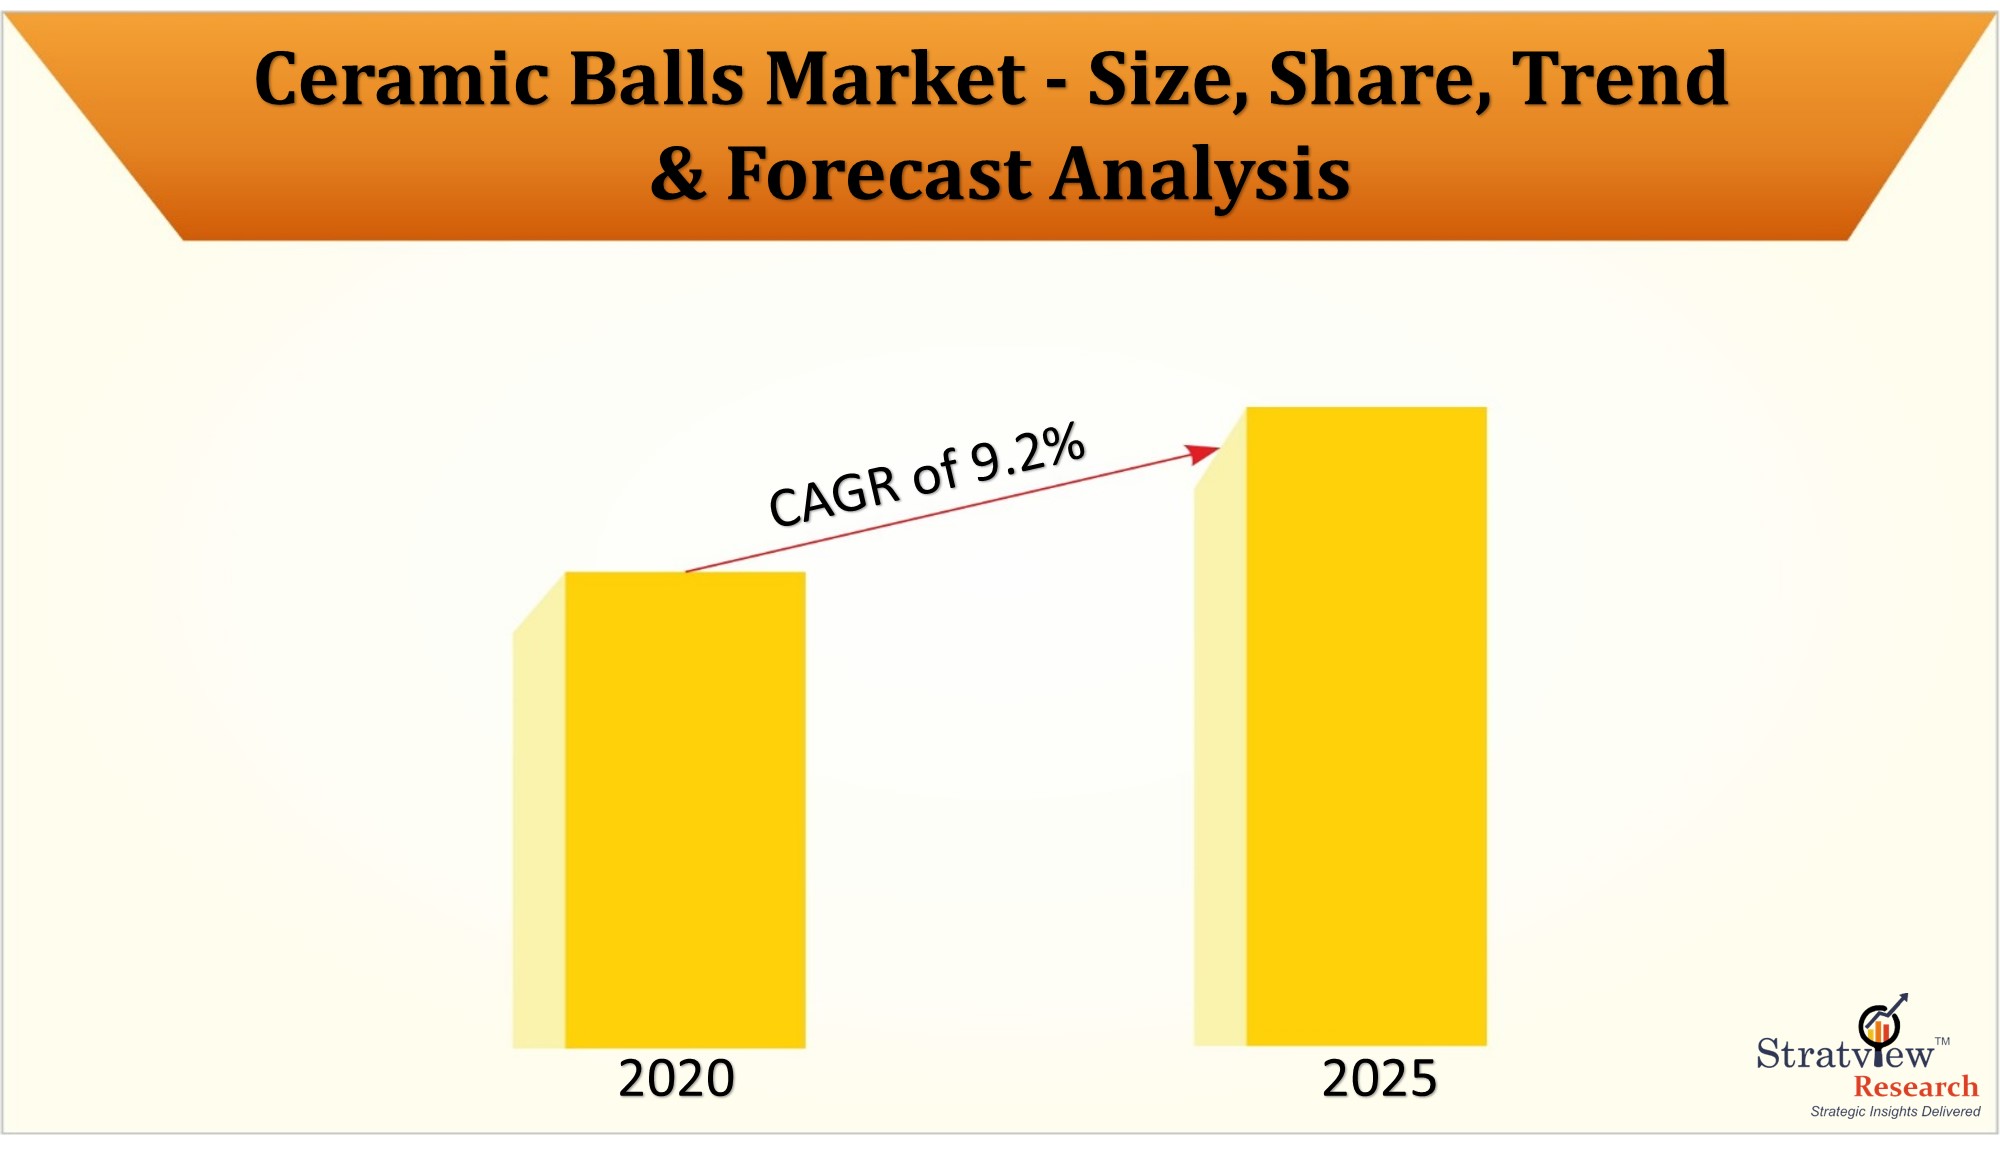 Ceramic Balls Market likely to witness an impressive CAGR of 9.2%, as estimated by Stratview Research